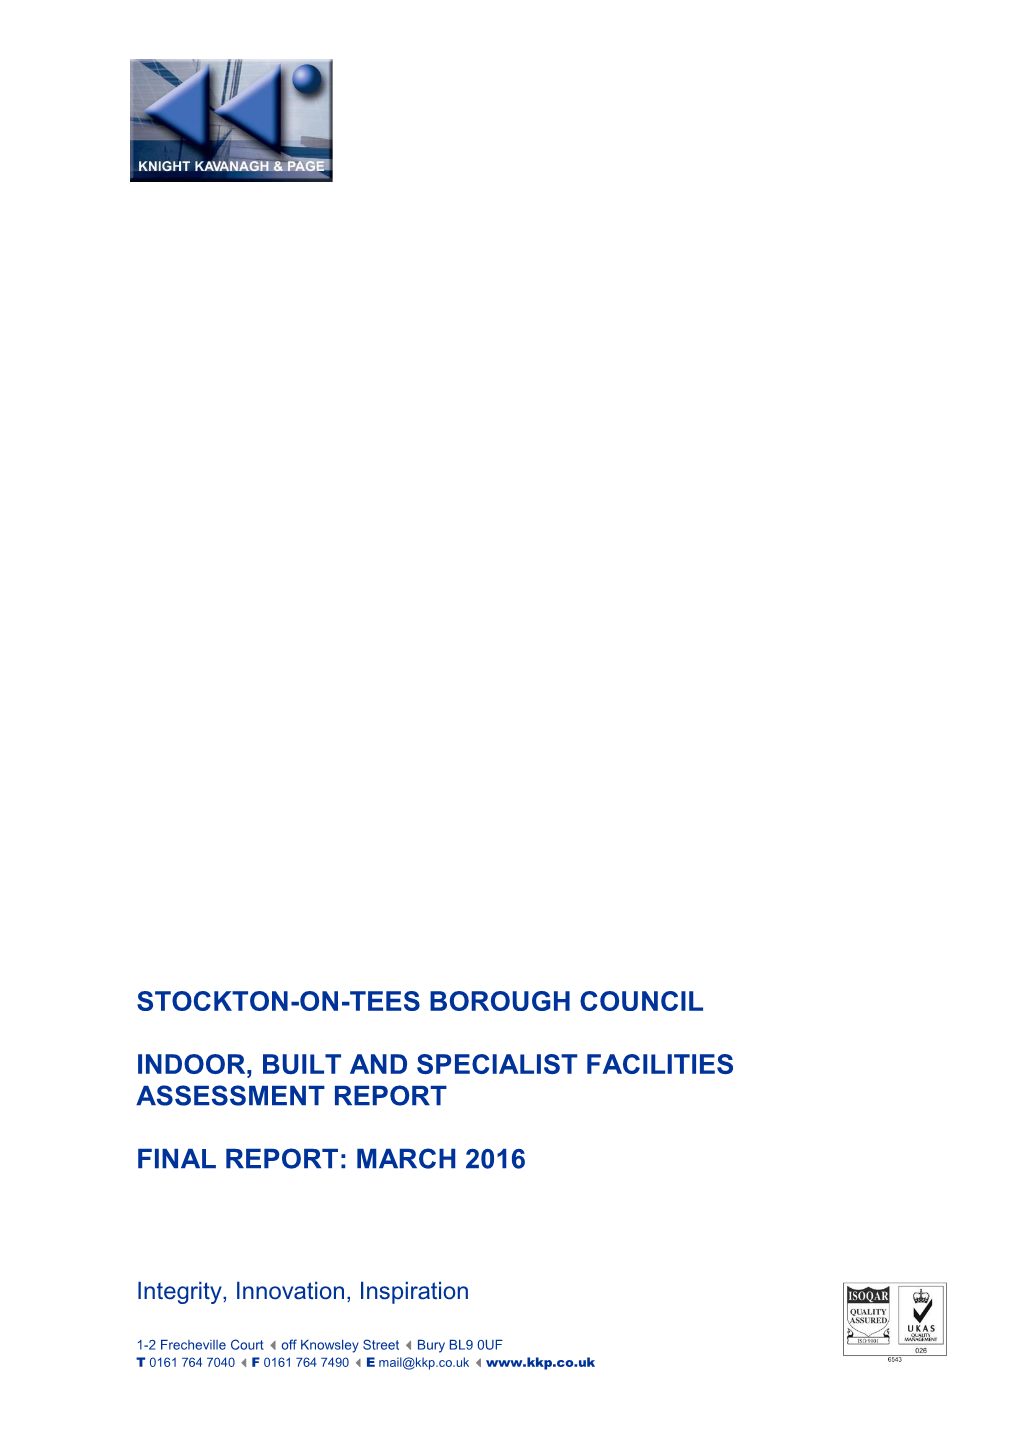 Stockton-On-Tees Borough Council Indoor, Built and Specialist Facilities Assessment